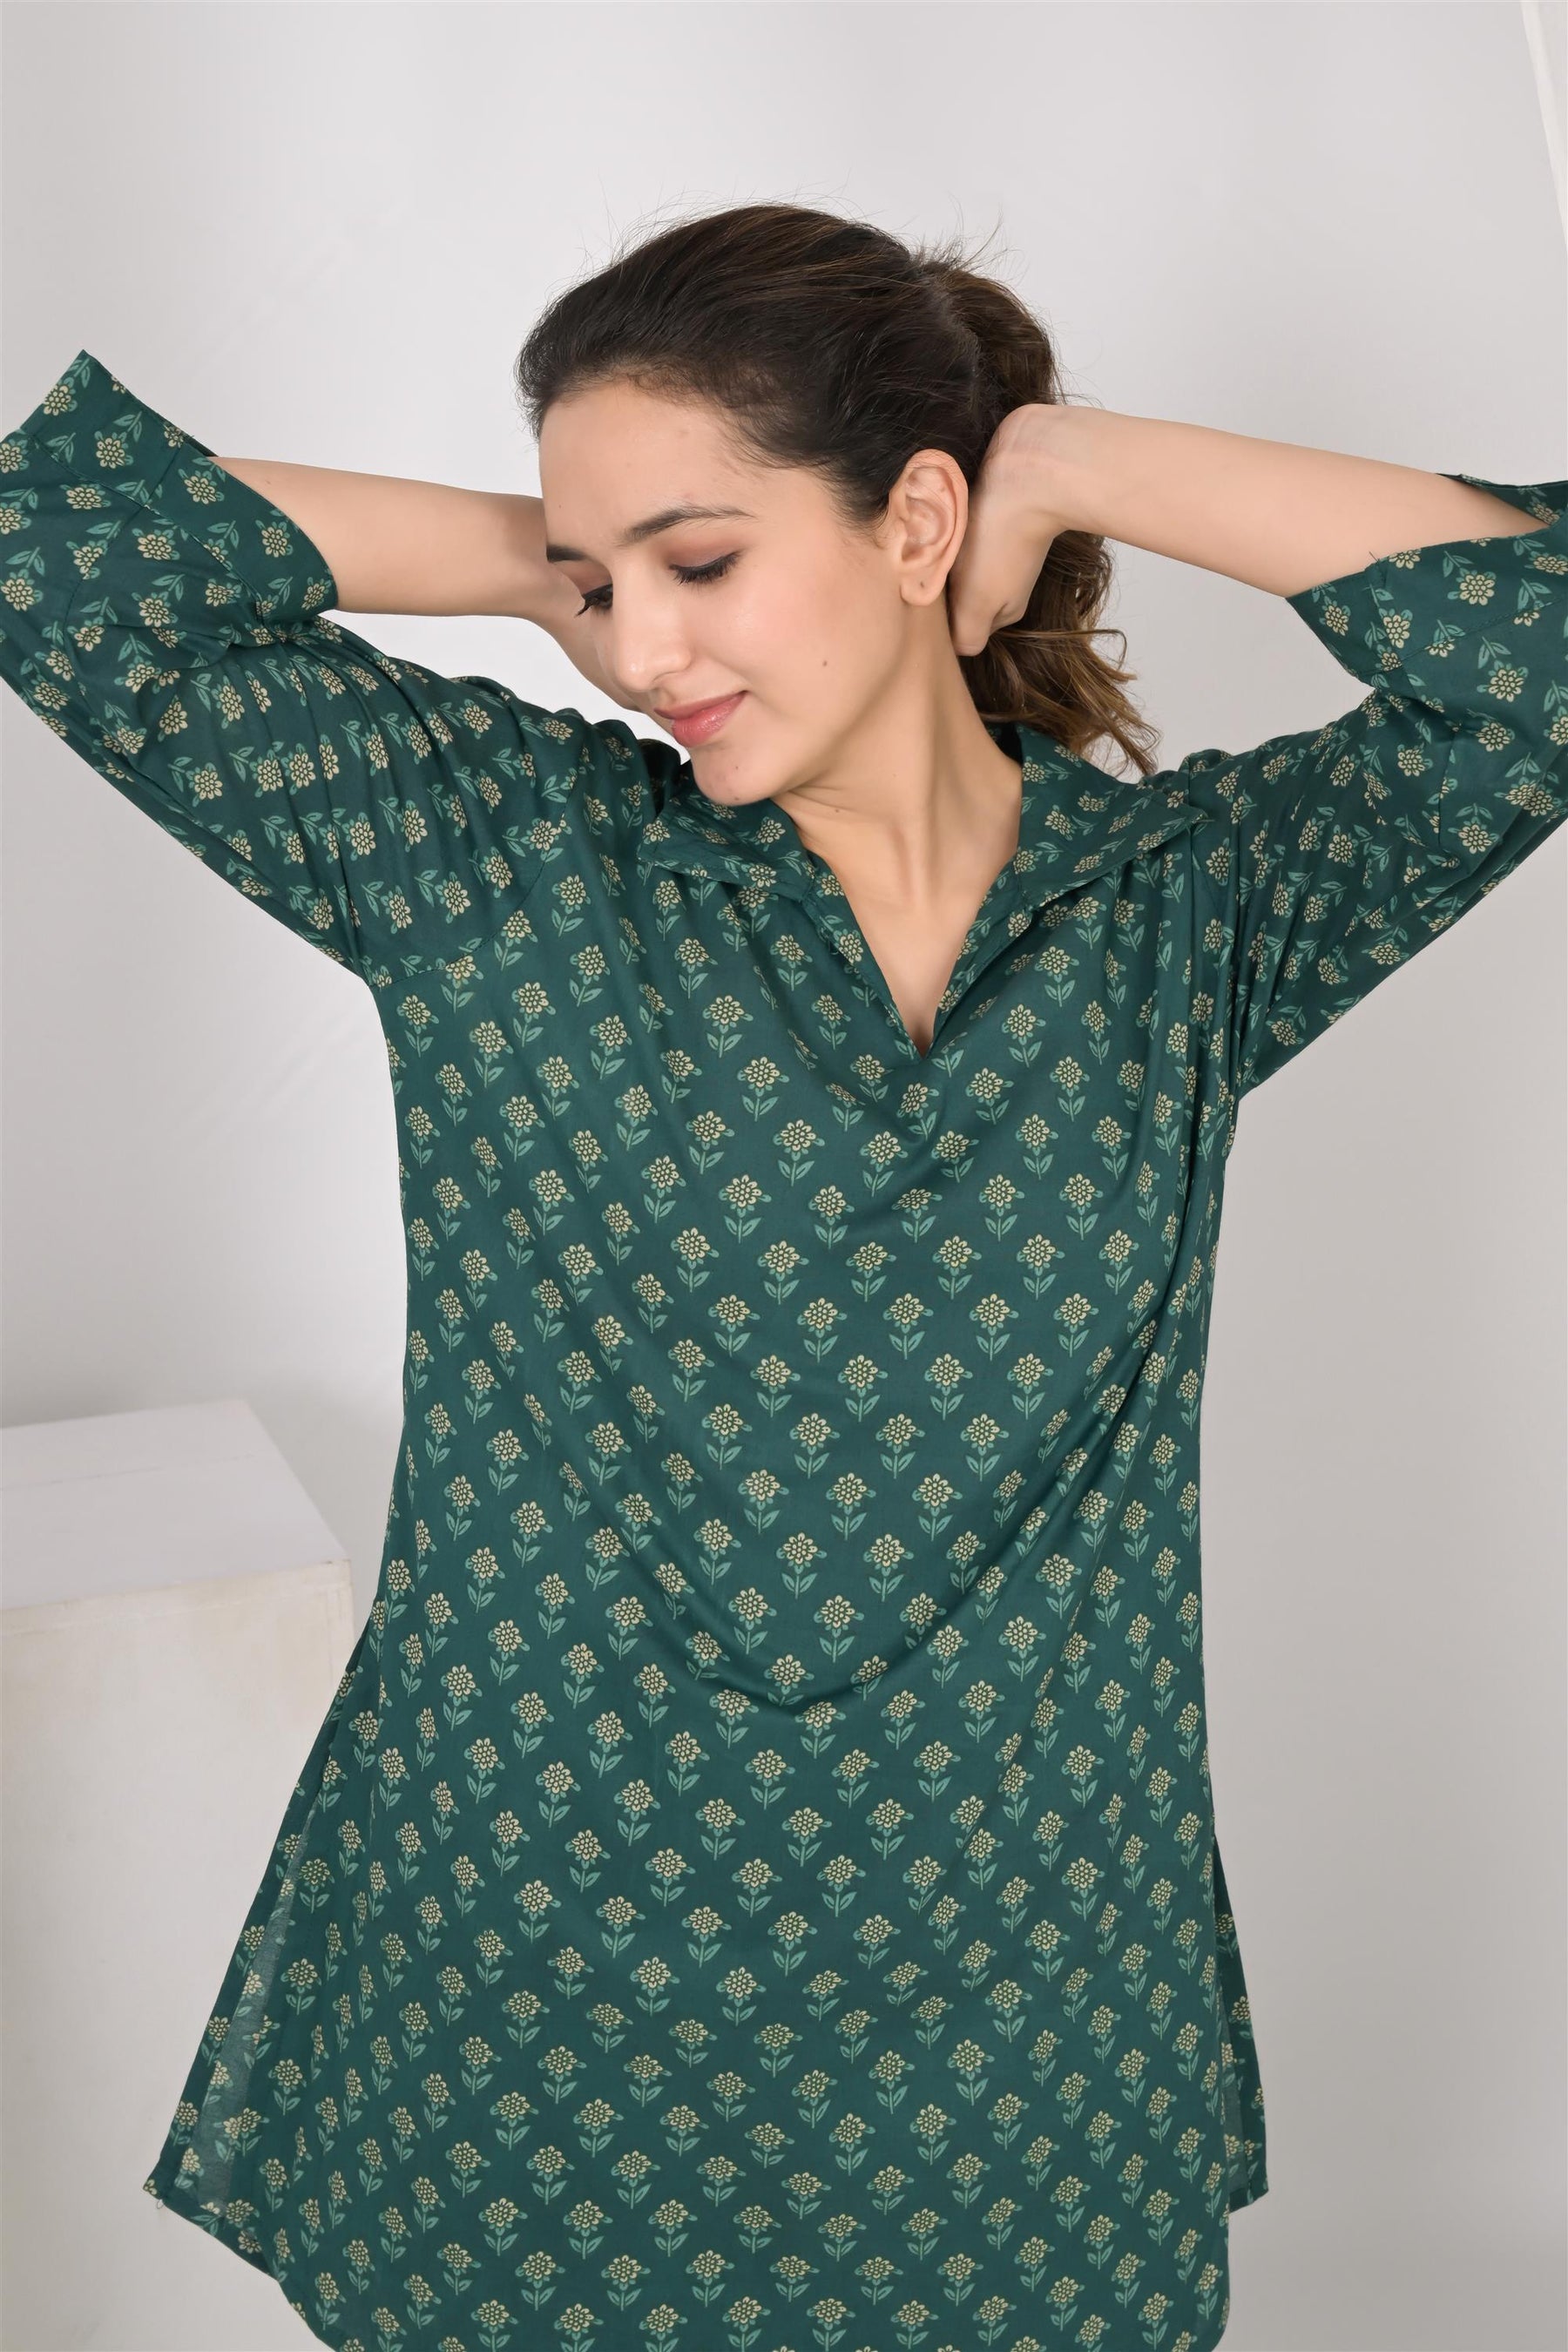 Green Printed Cotton Night Suit